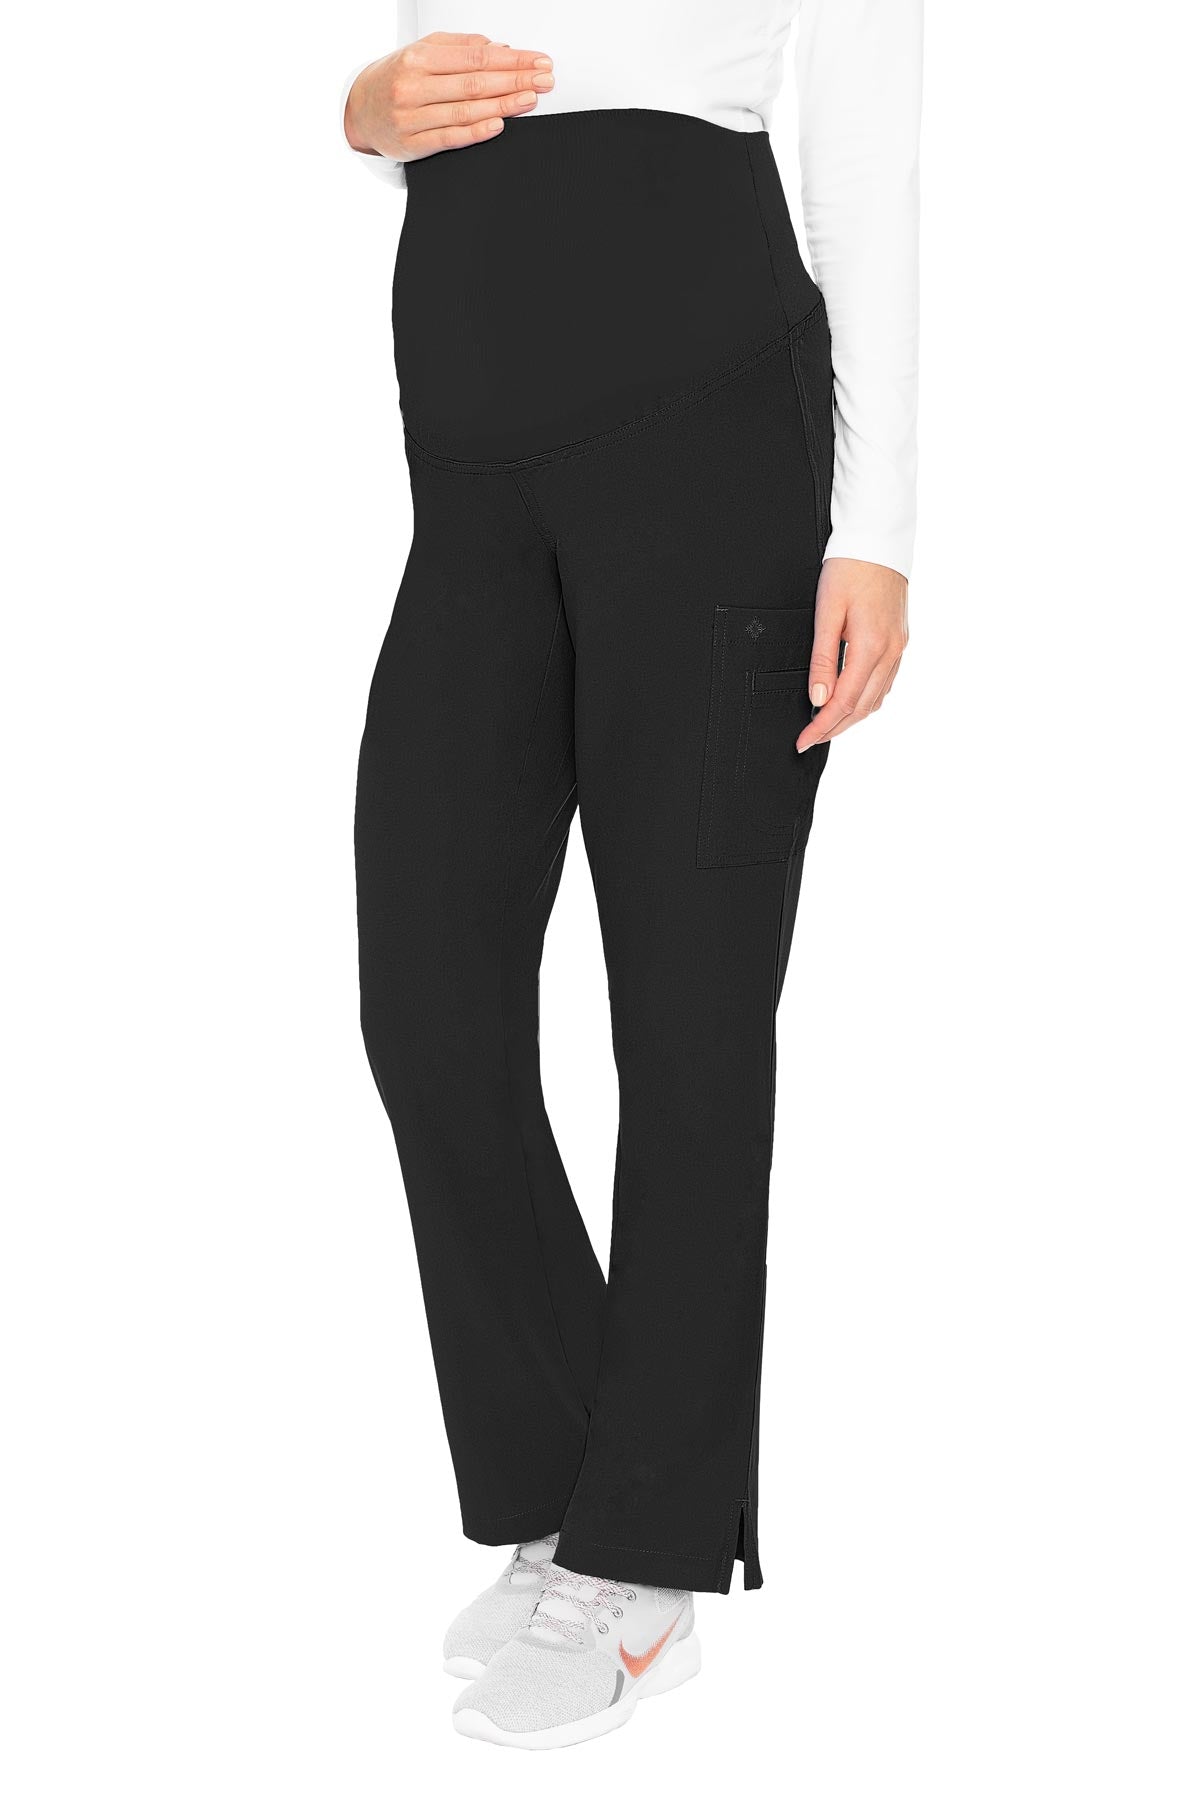 Med Couture Black PANT